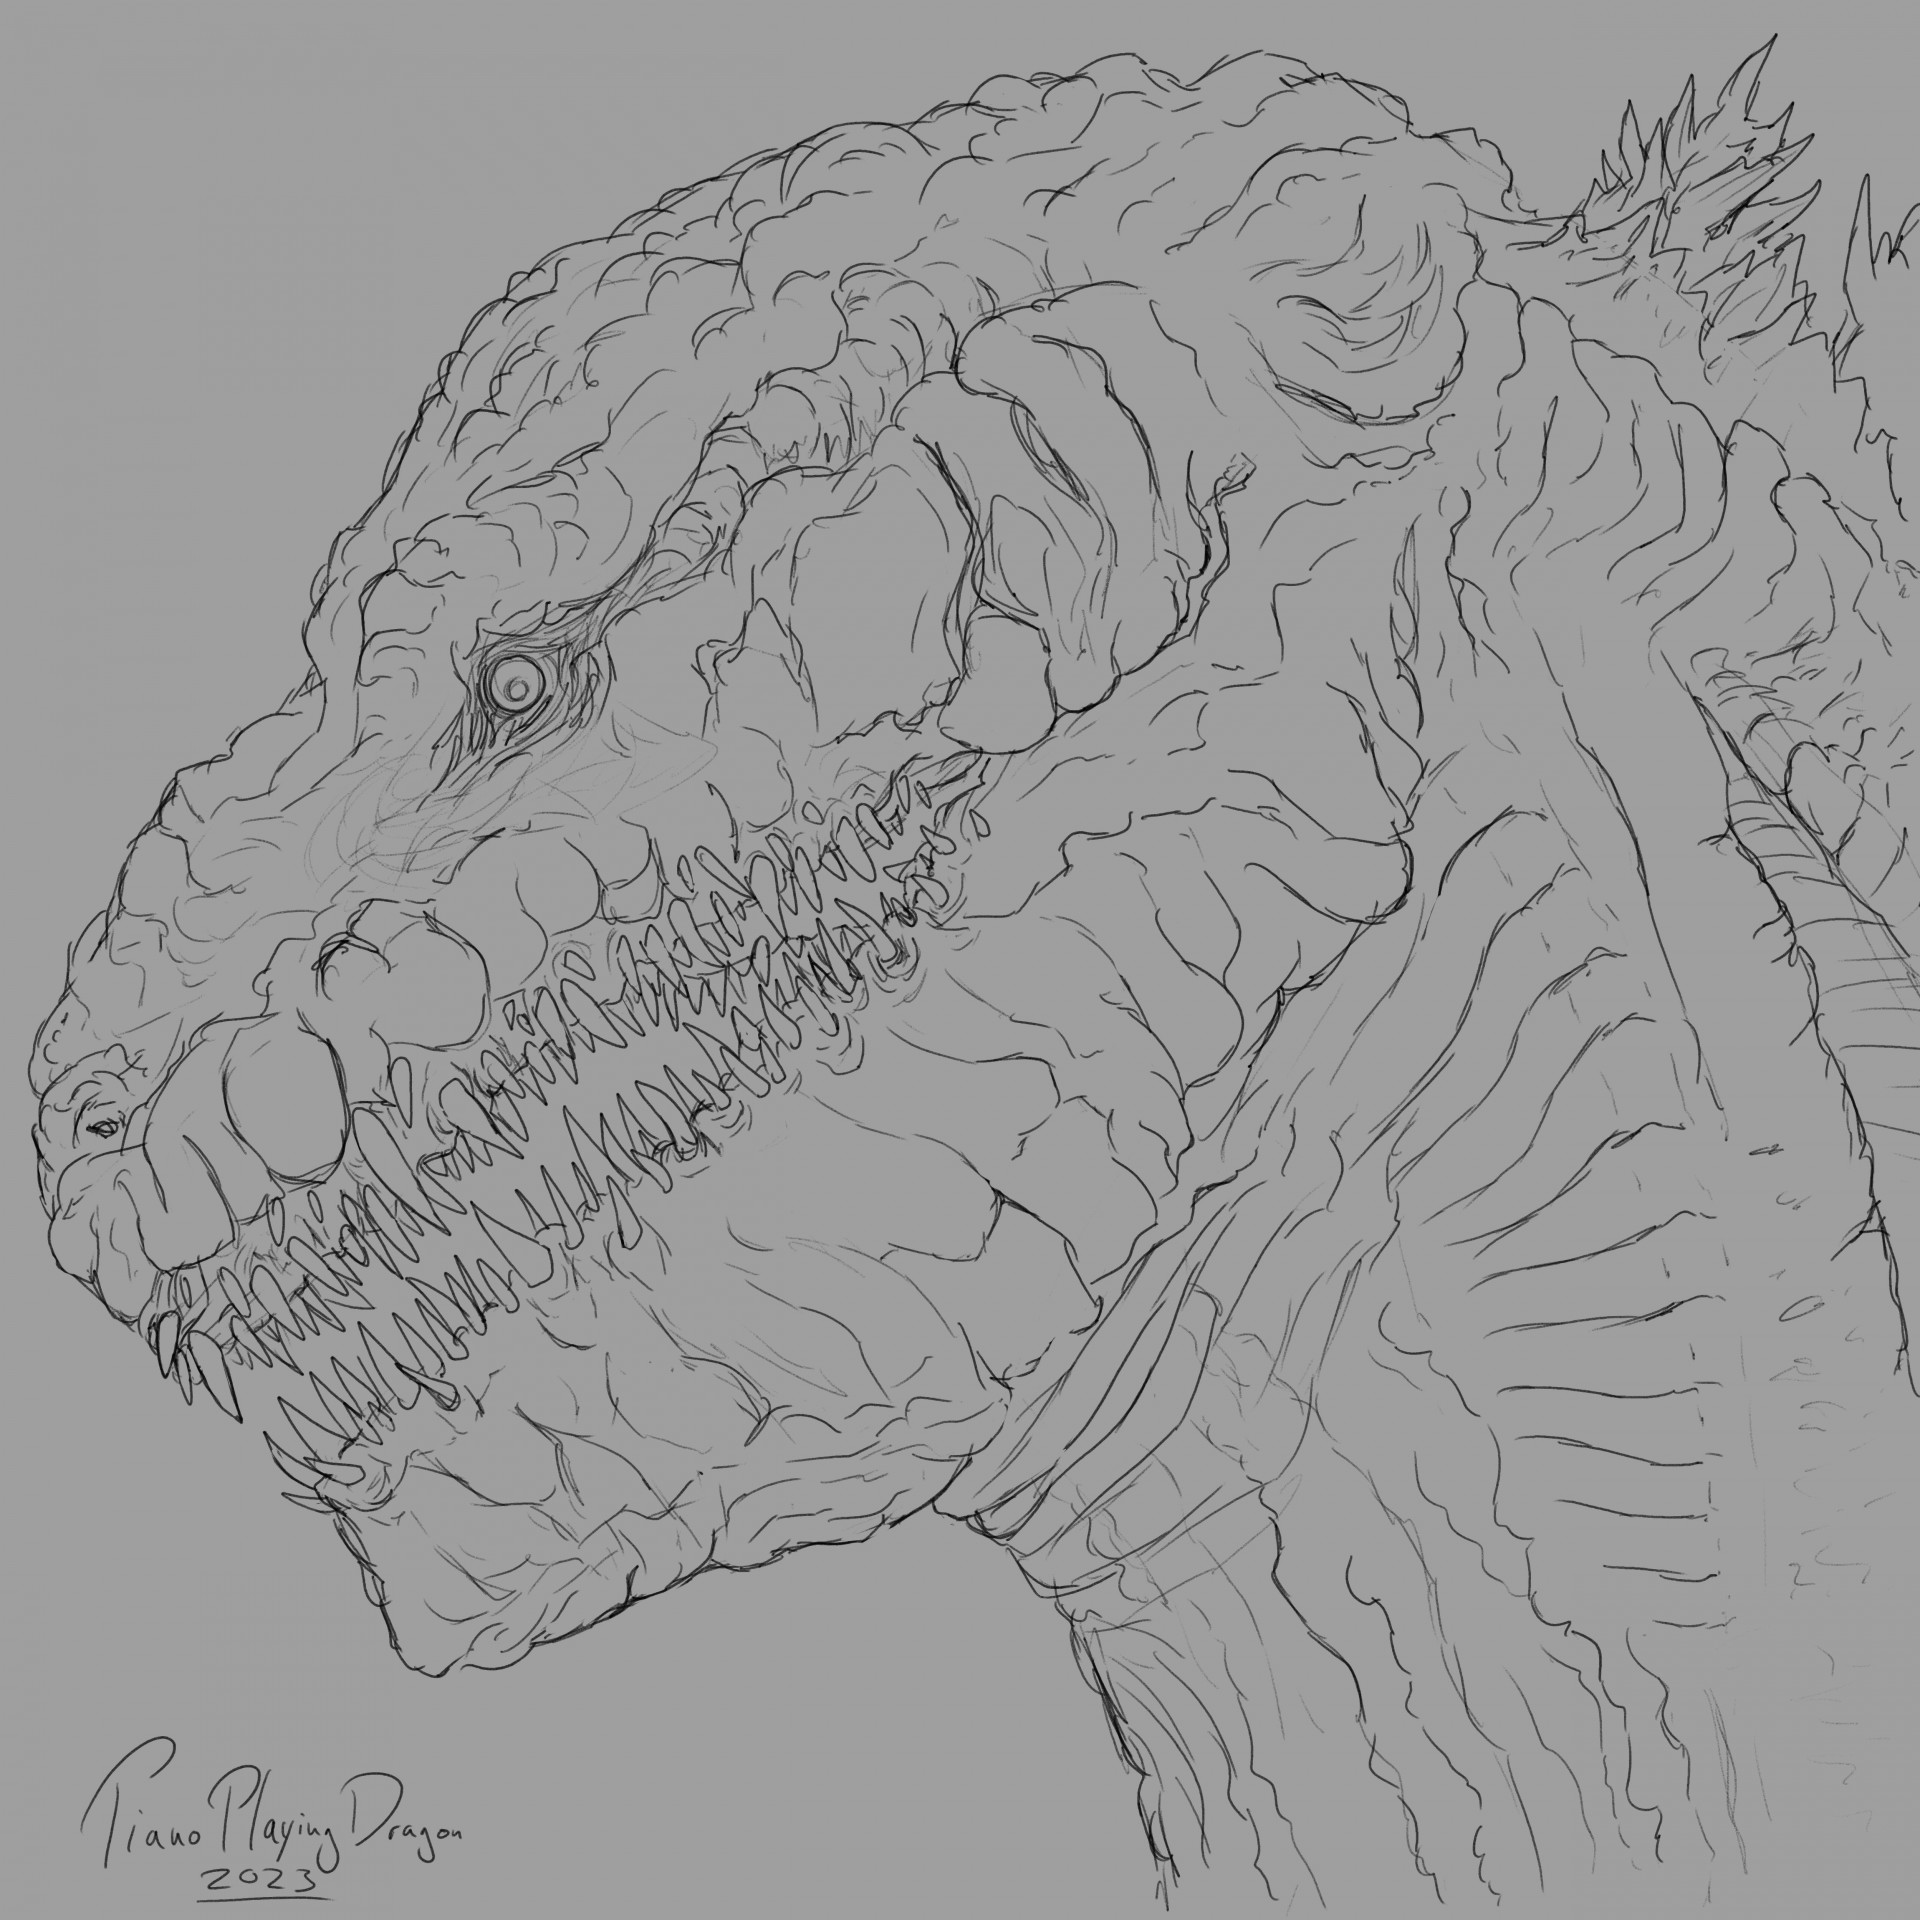 I NEED to look at images — was trying to draw shin godzilla from memory